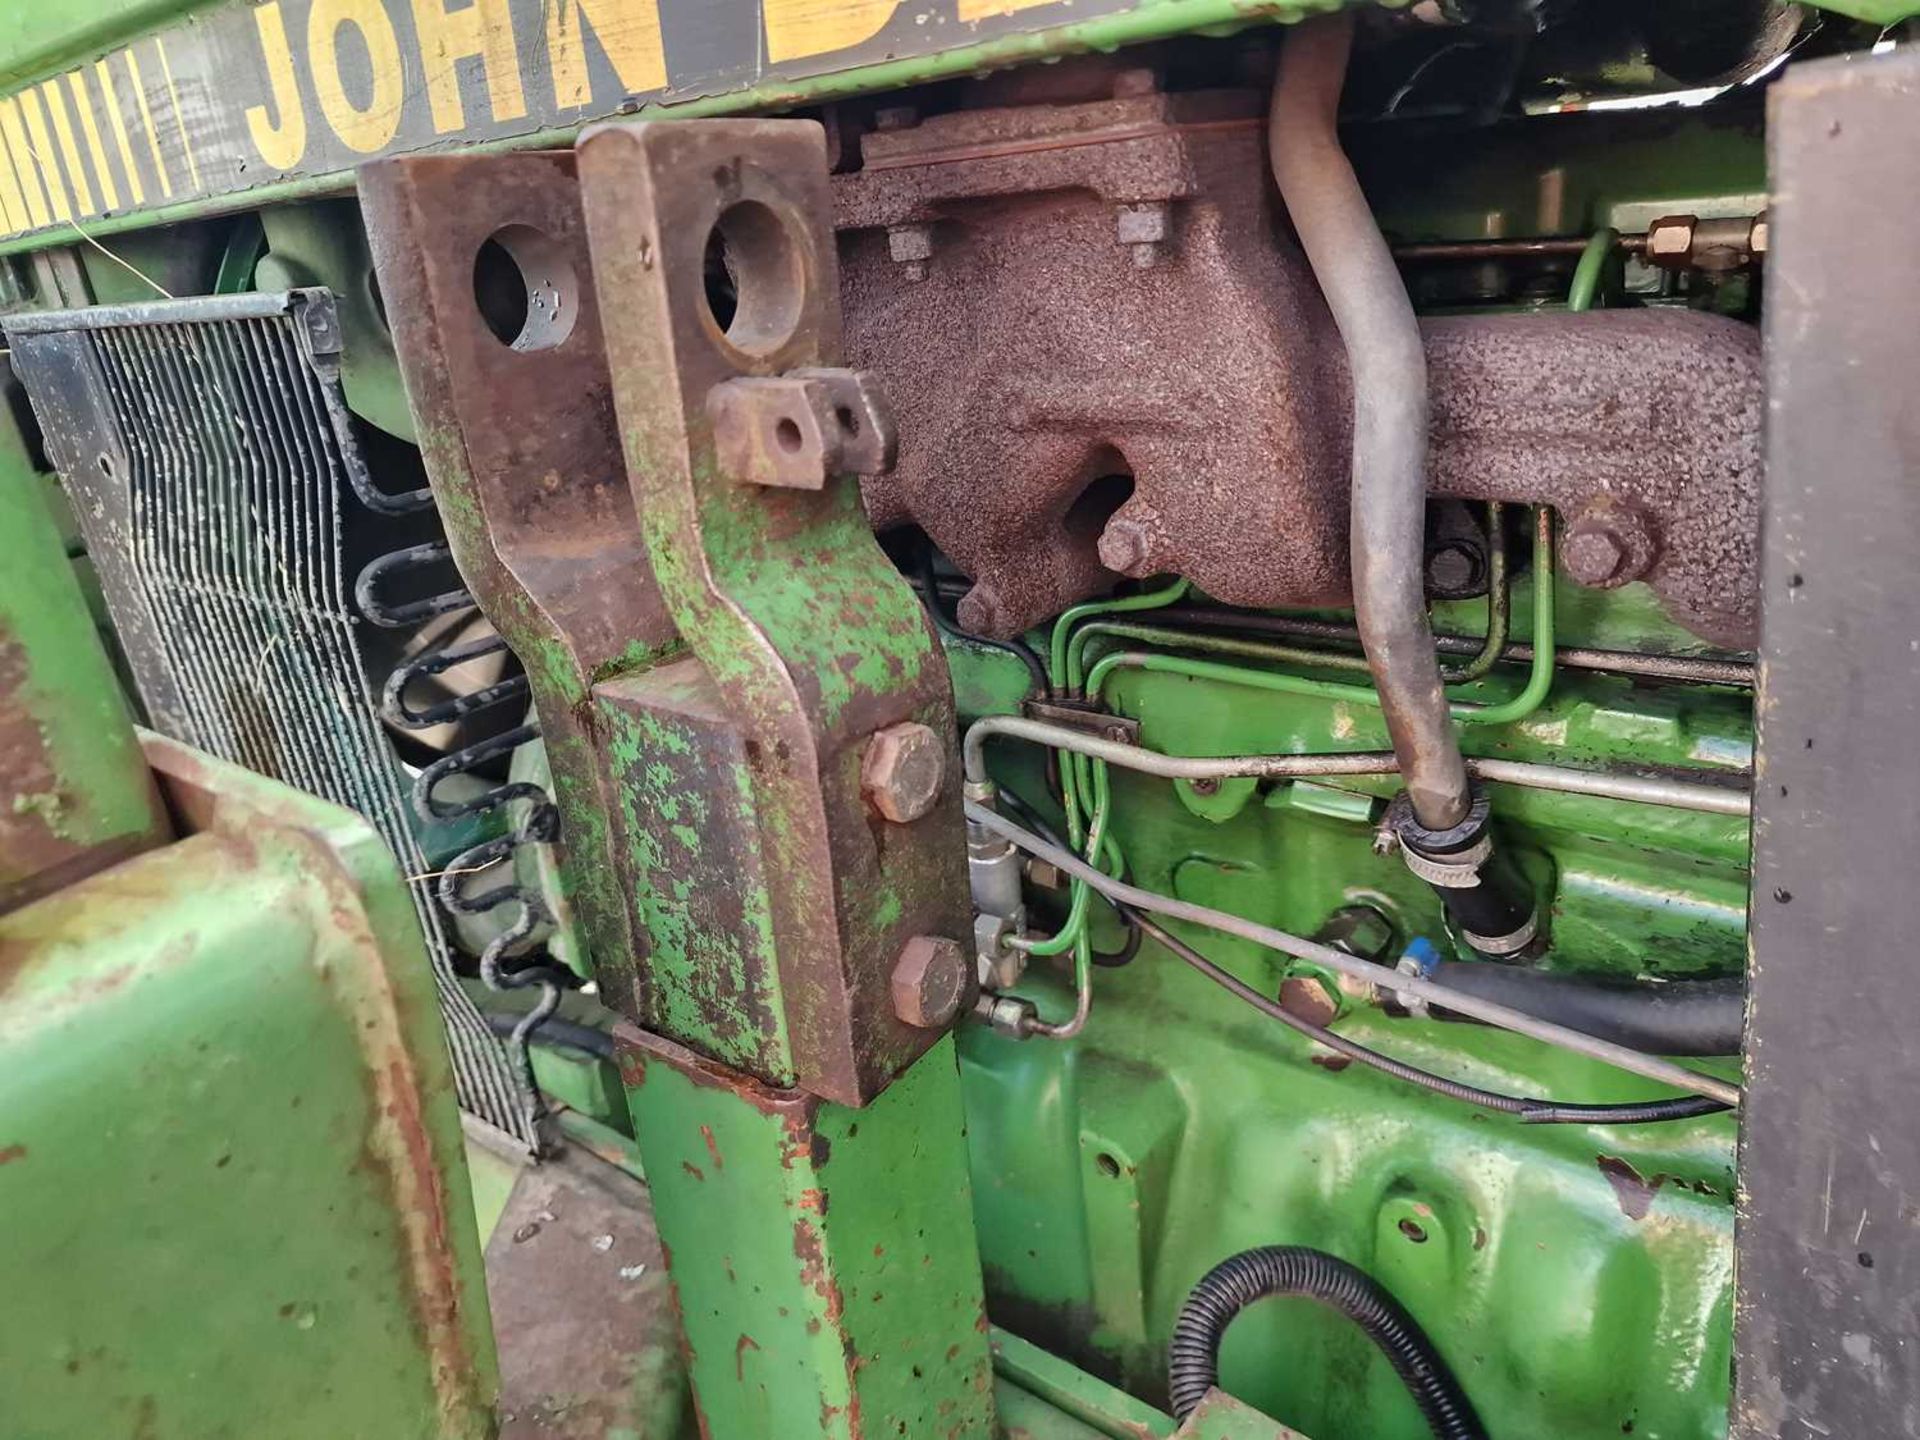 1989 John Deere 2850 4WD Tractor, Loader, 2 Spool Valves, Push Out Hitch (Reg. Docs. Available) - Image 20 of 52